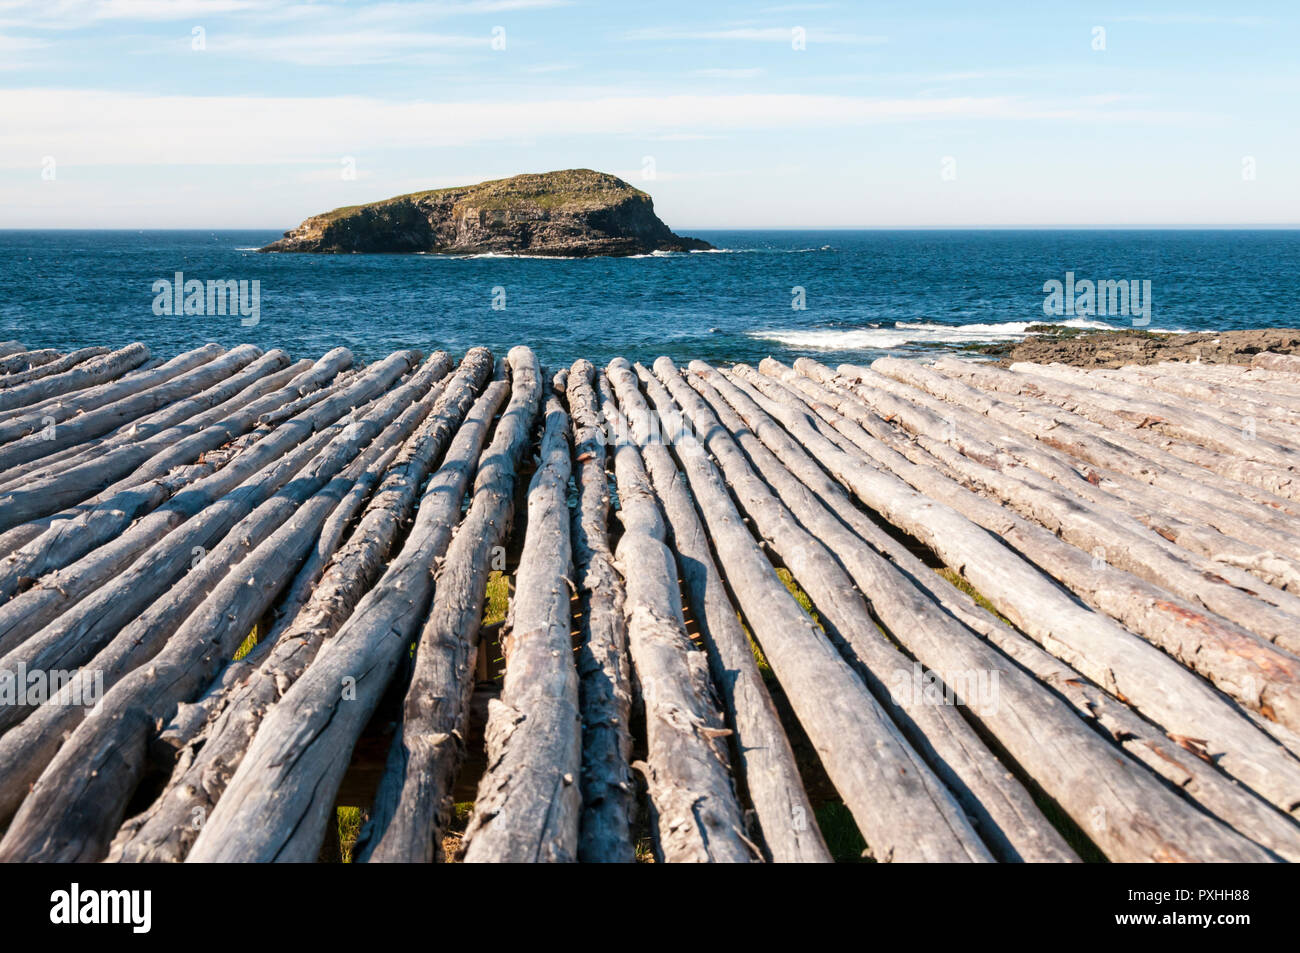 A Newfoundland fish flake, a raised wooden platform for drying fish. Stock Photo